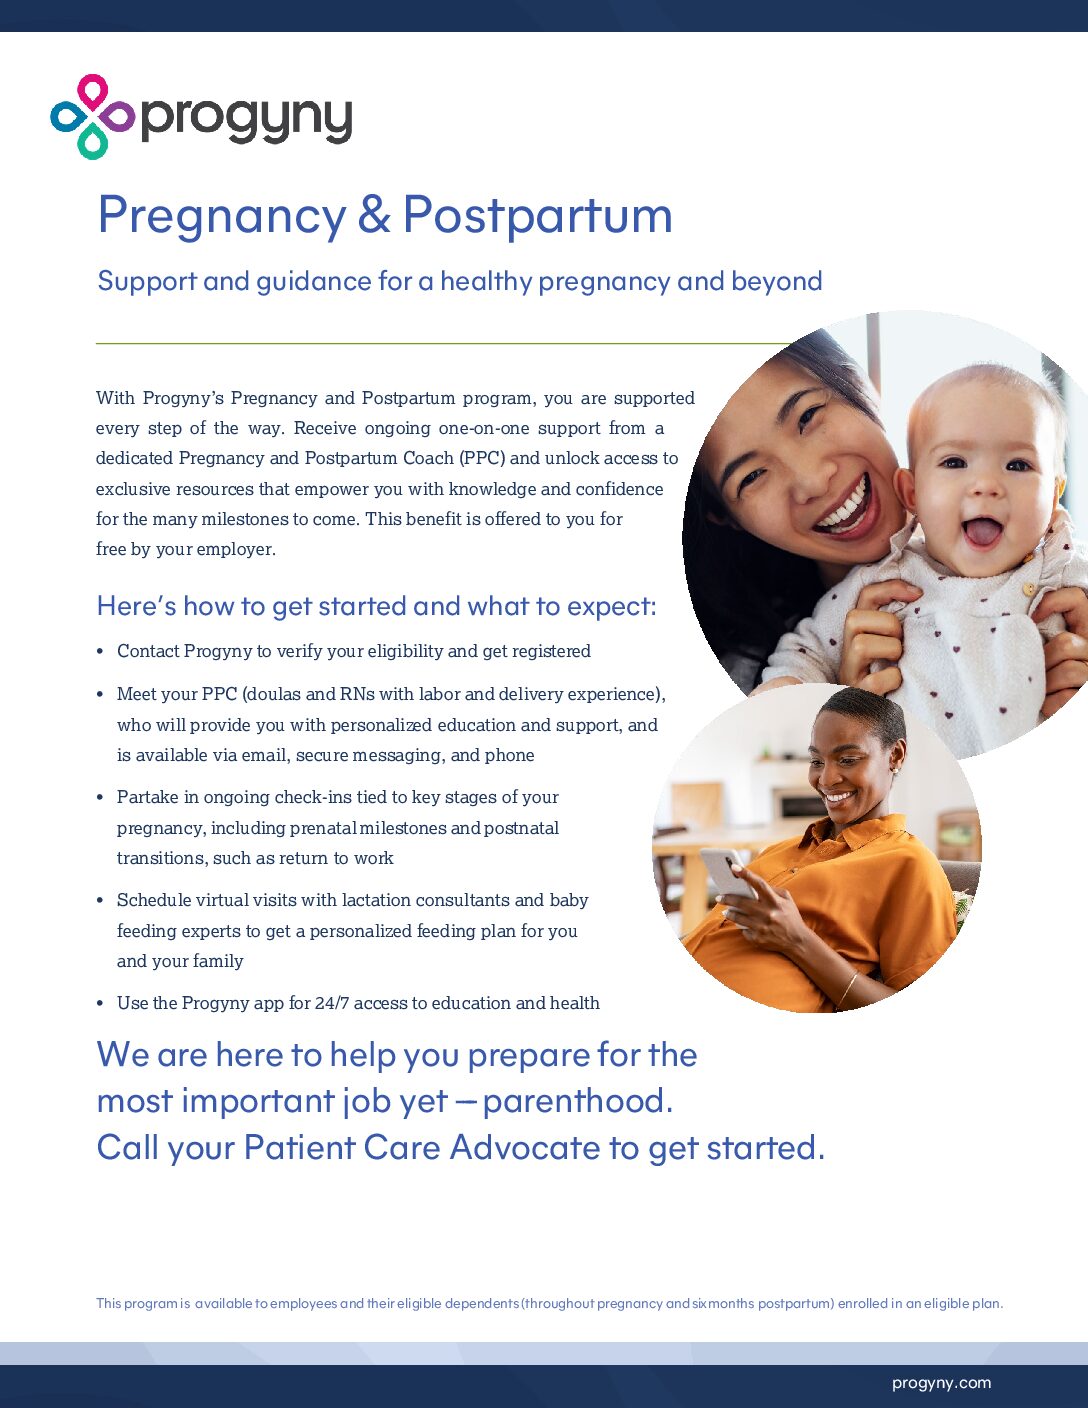 Progyny_Pregnancy_and_Postpartum_What_to_Expect-pdf